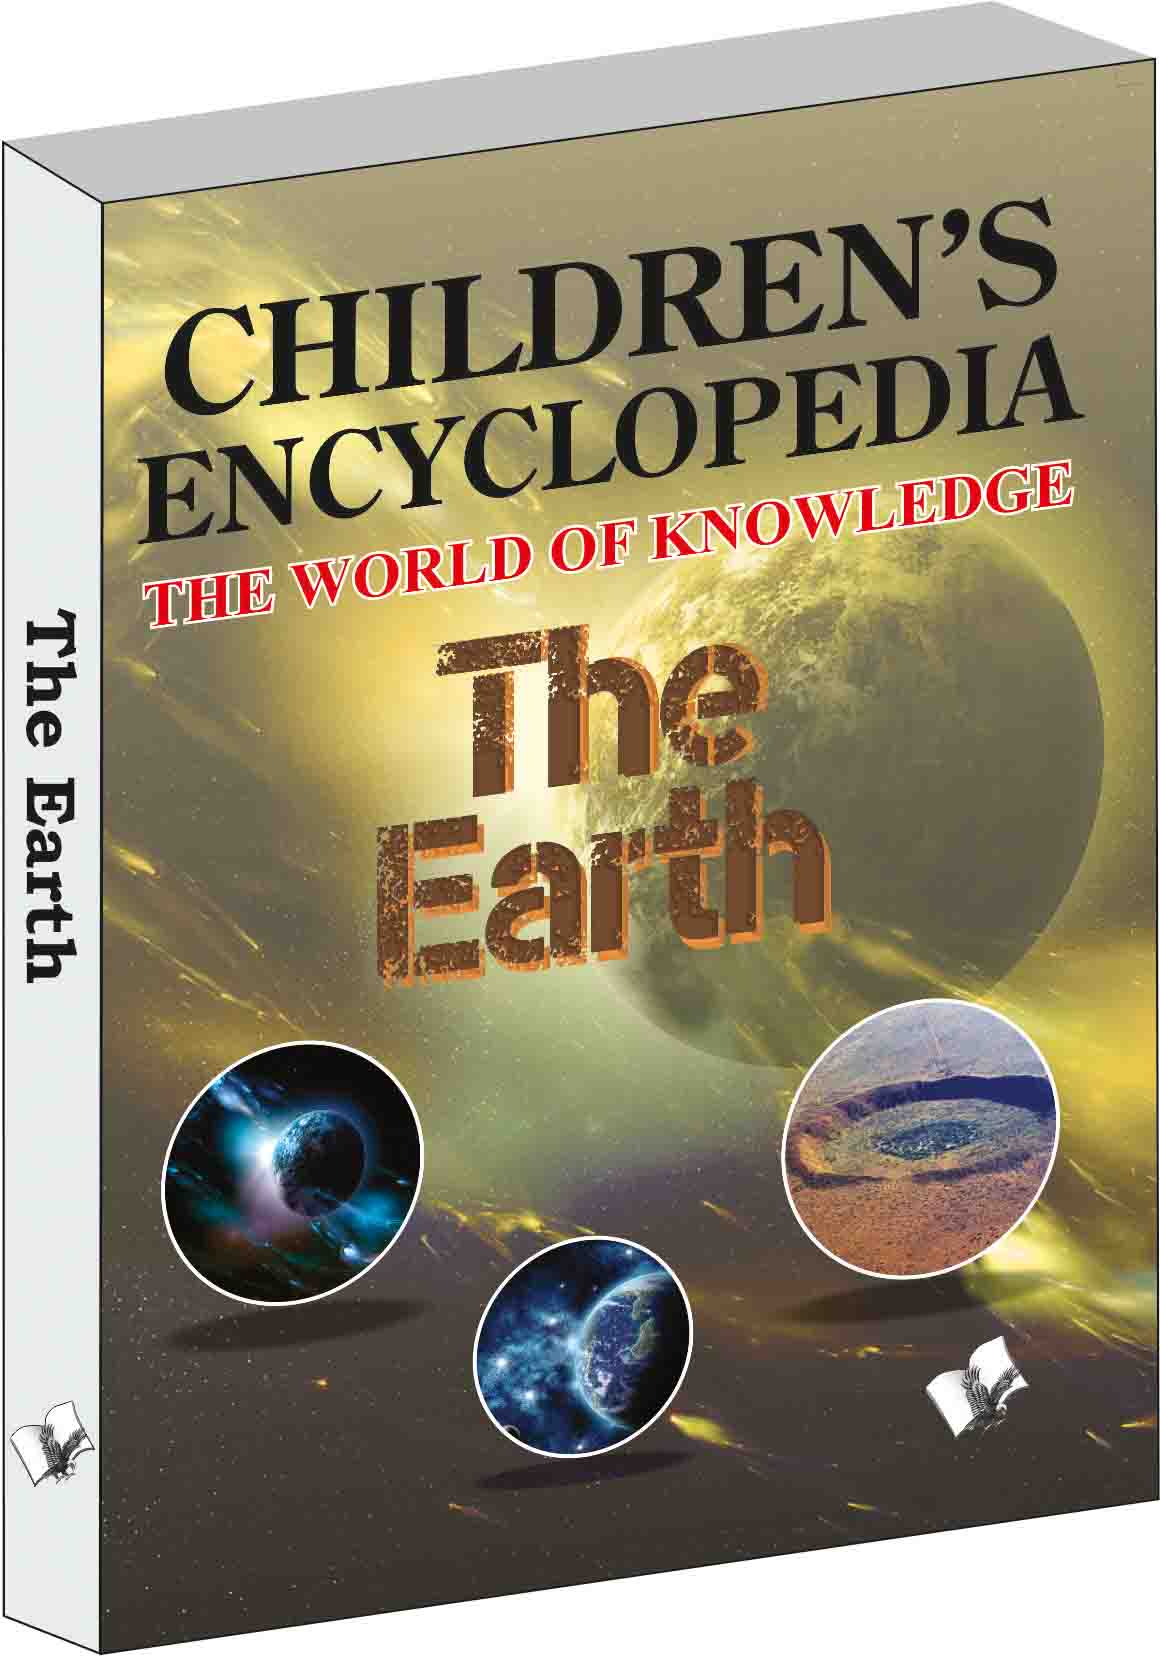 Children's Encyclopedia - The Earth -The World of Knowledge for the enquisitive minds